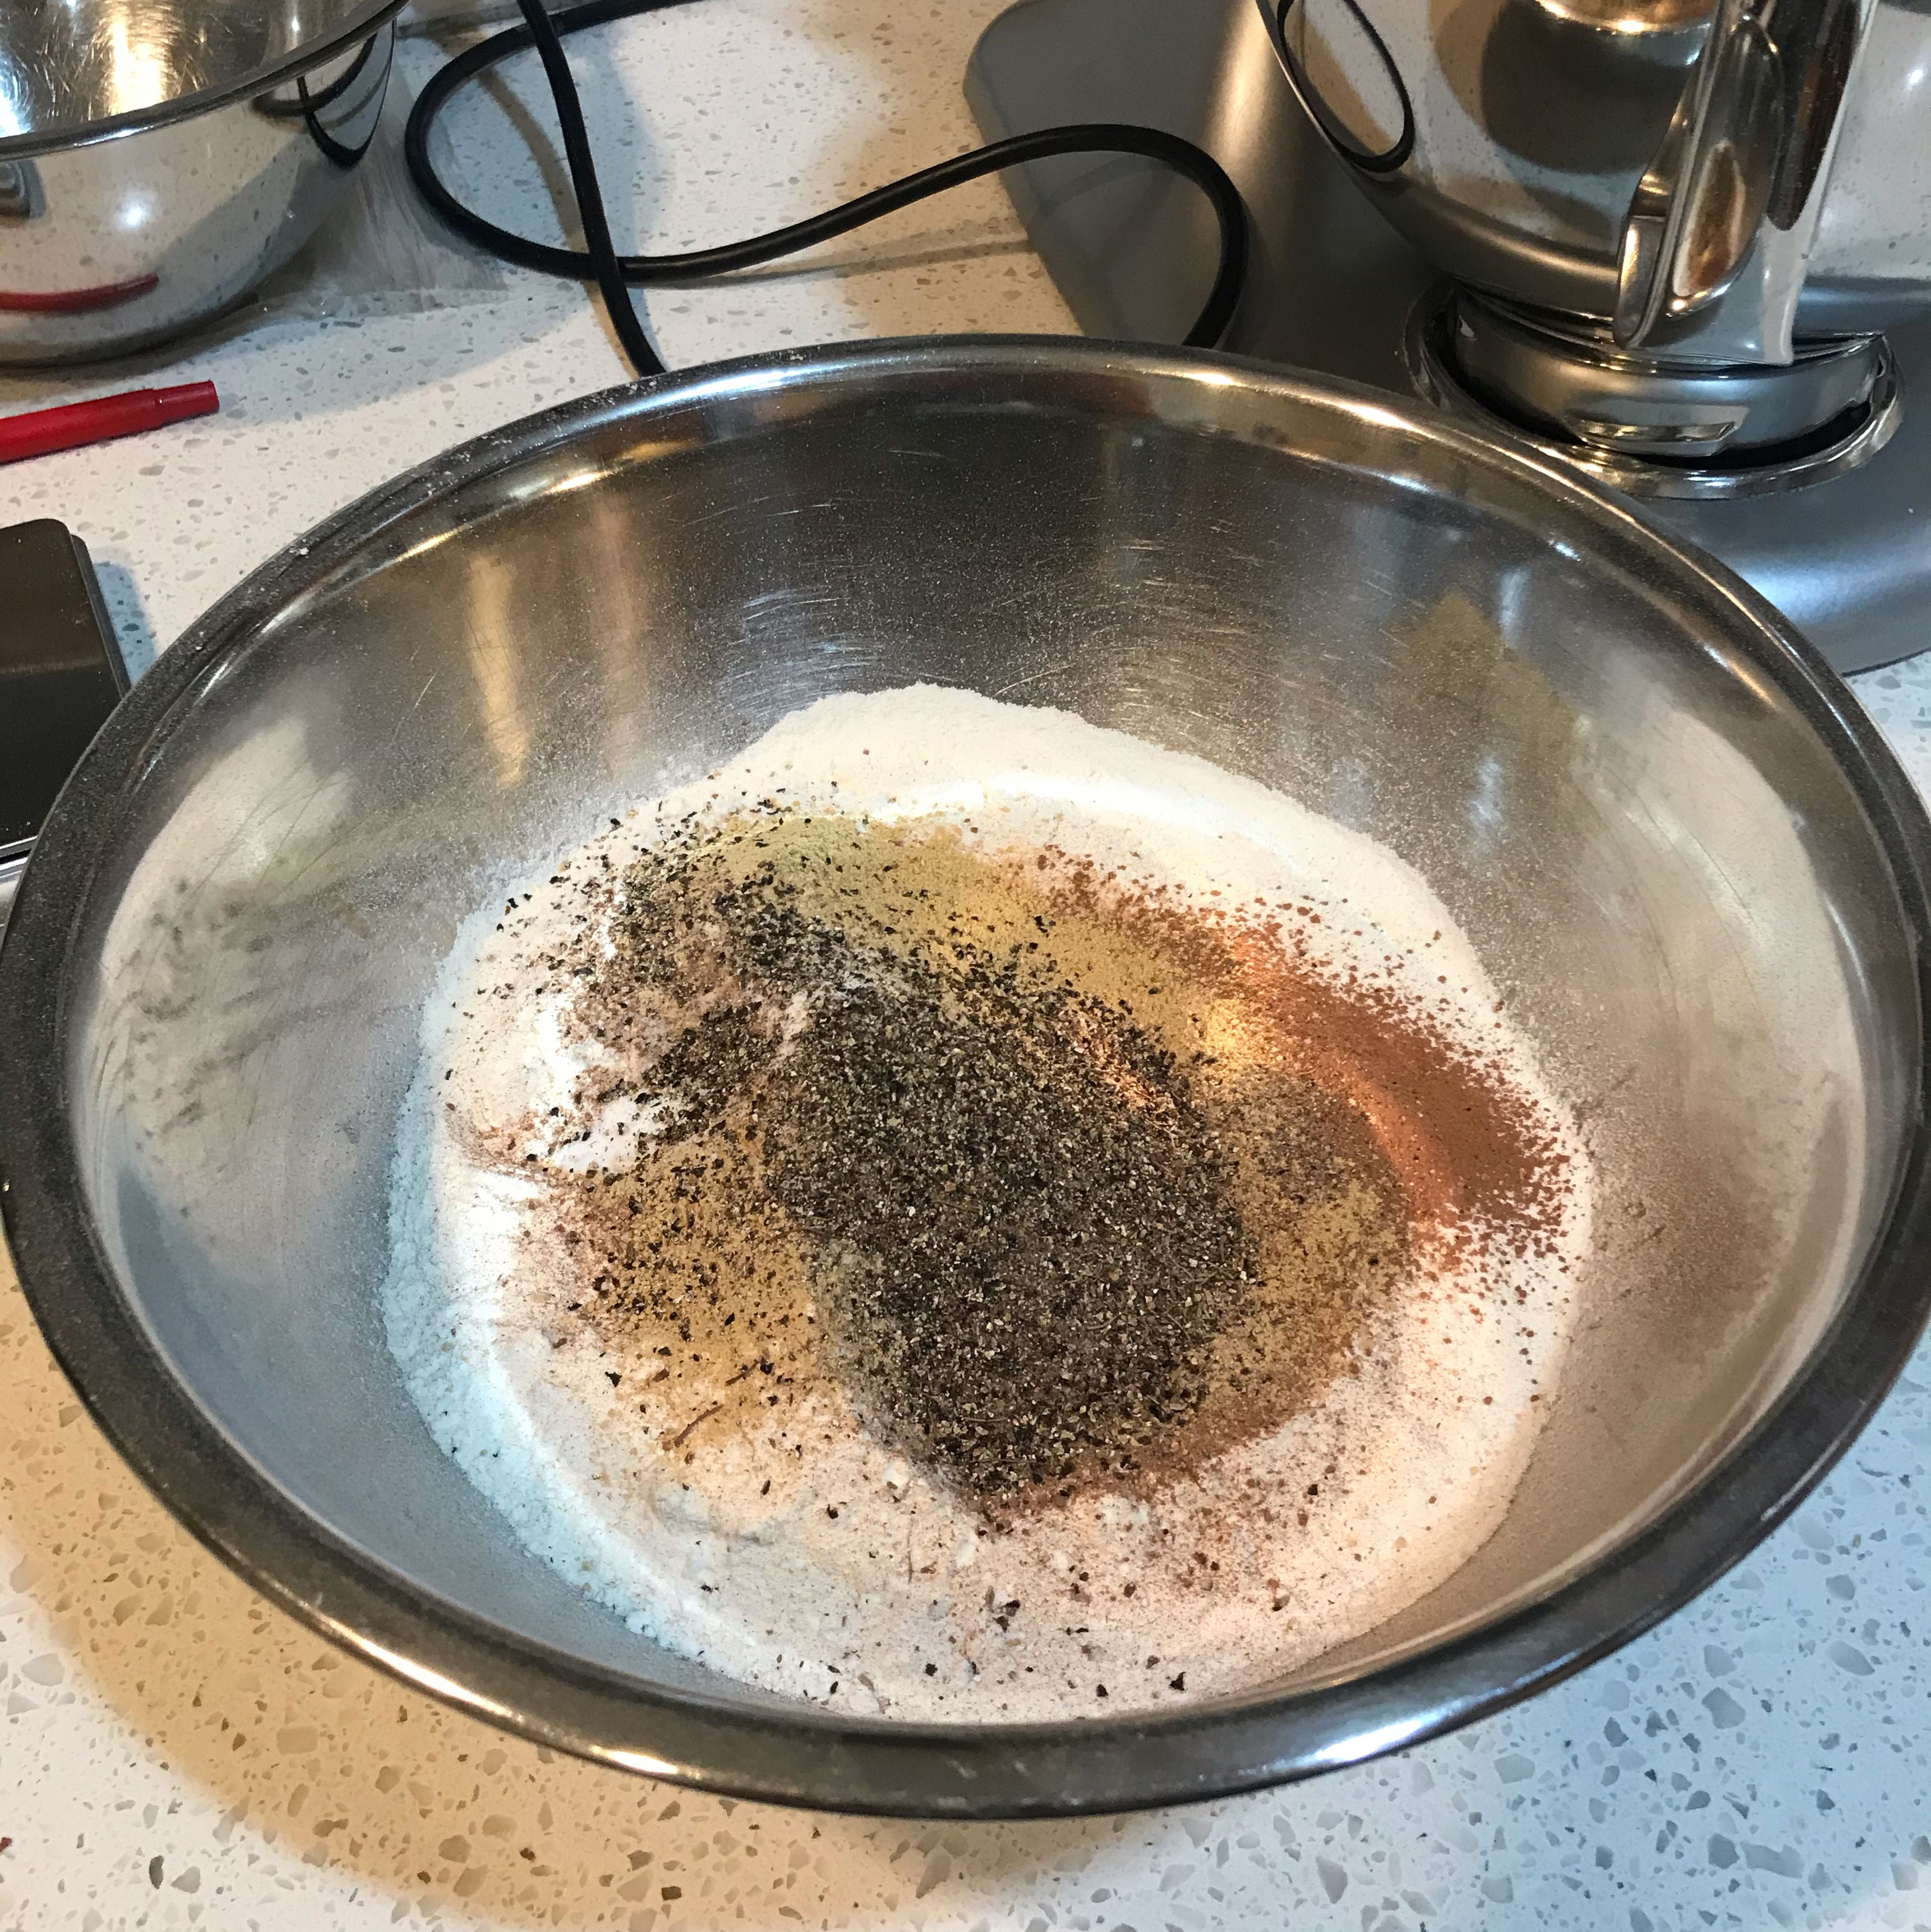 In a large bowl, sift the flour, cocoa powder, ground dried ginger, baking soda, black cardamom and black pepper. If you can’t find black cardamom, you can substitute it with 1/2 tsp of ground clove and 1/4 tsp of ground green cardamom.